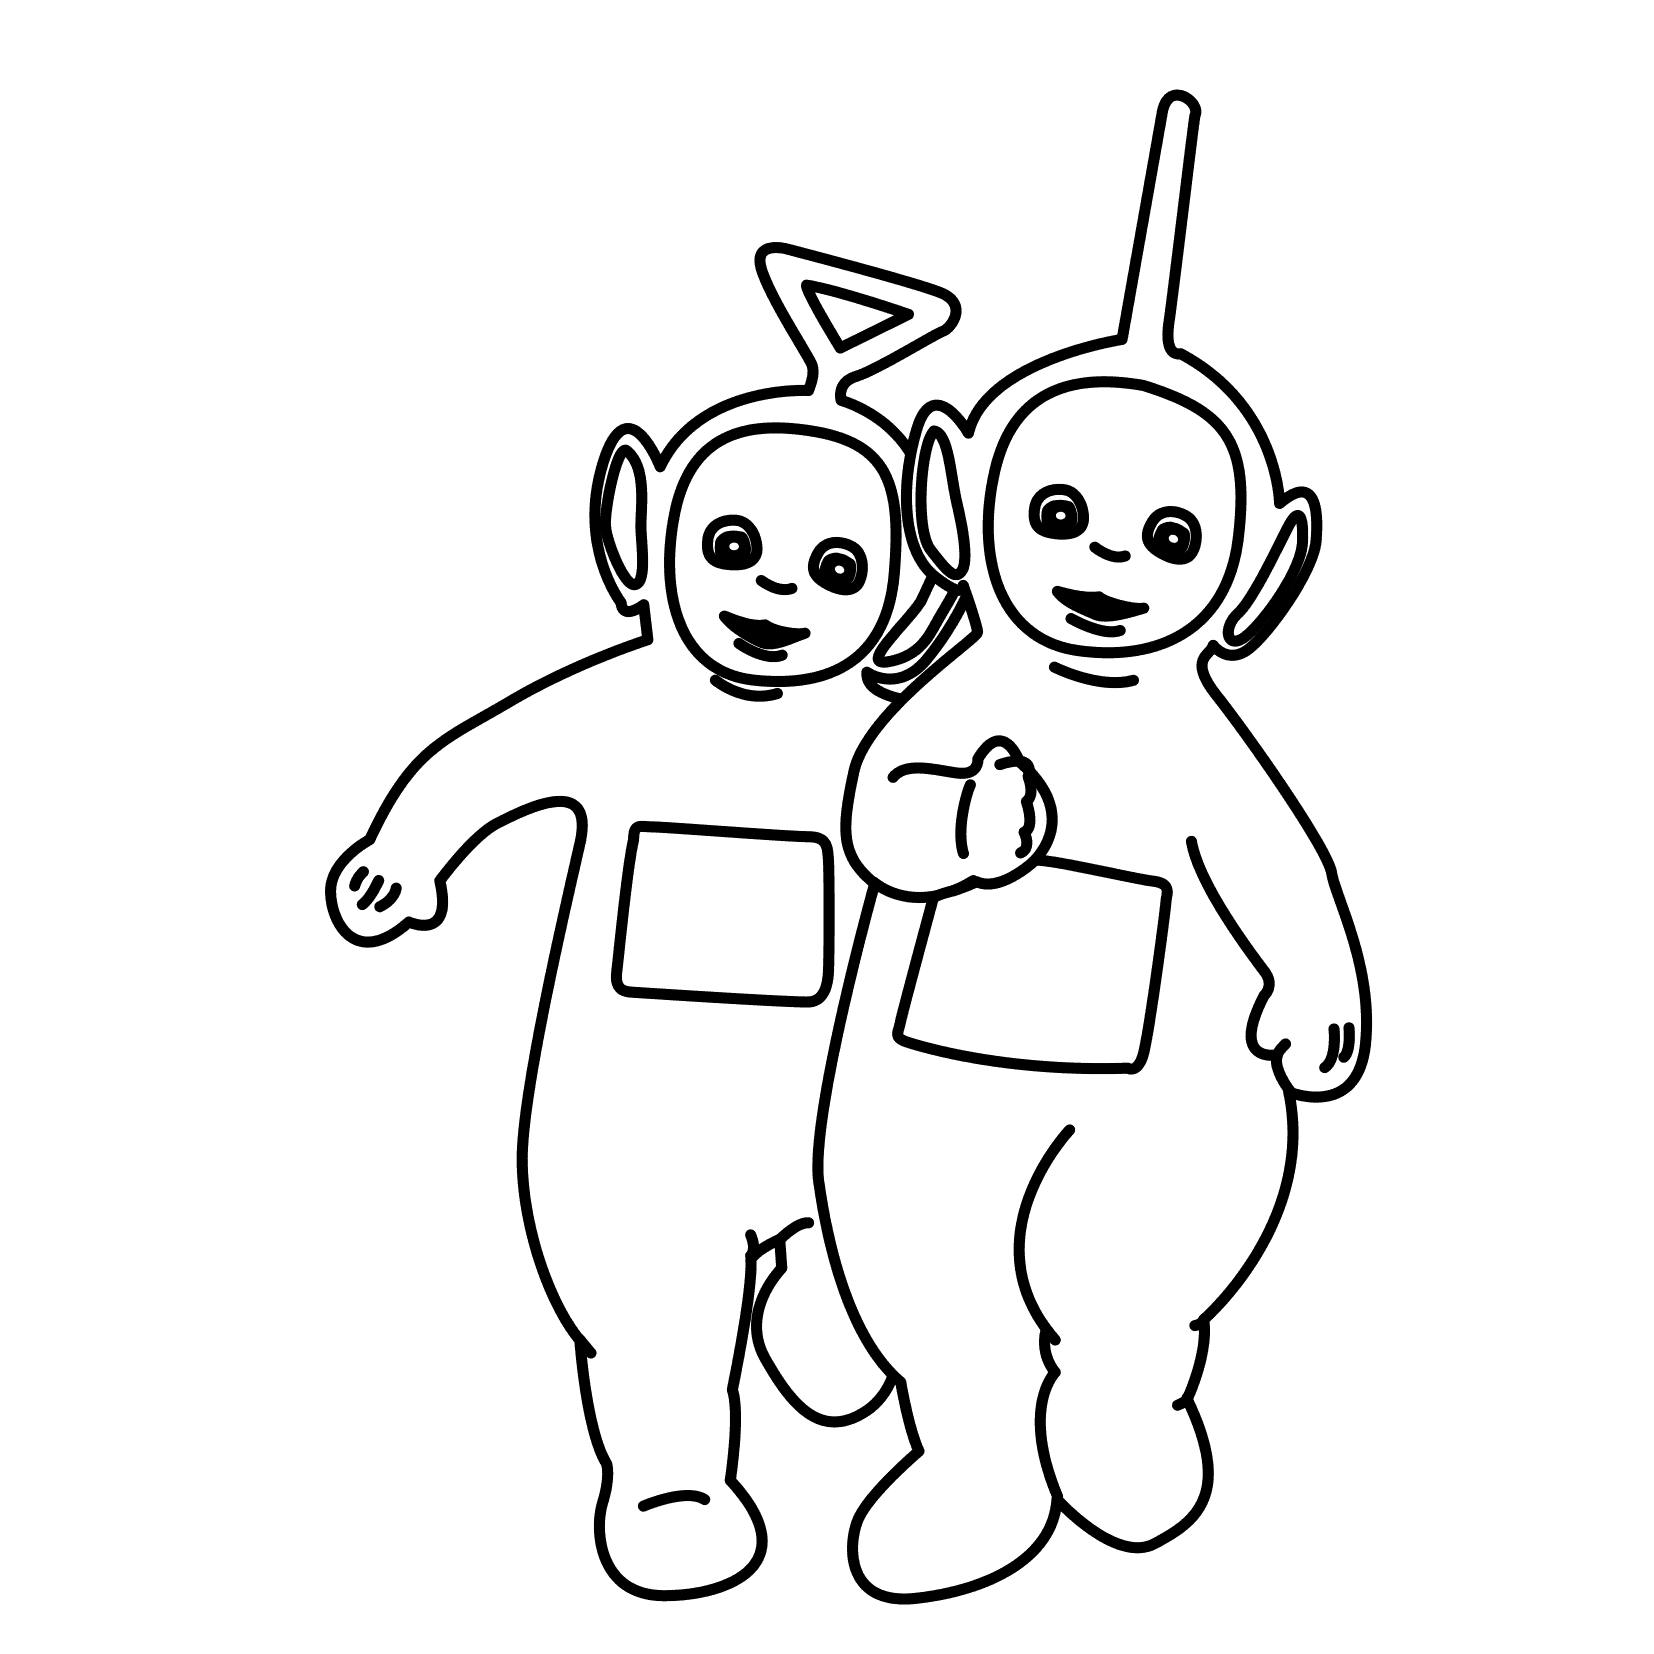 Teletubbies Coloring Pages TV Film Free of Teletubbies Printable 2020 08483 Coloring4free